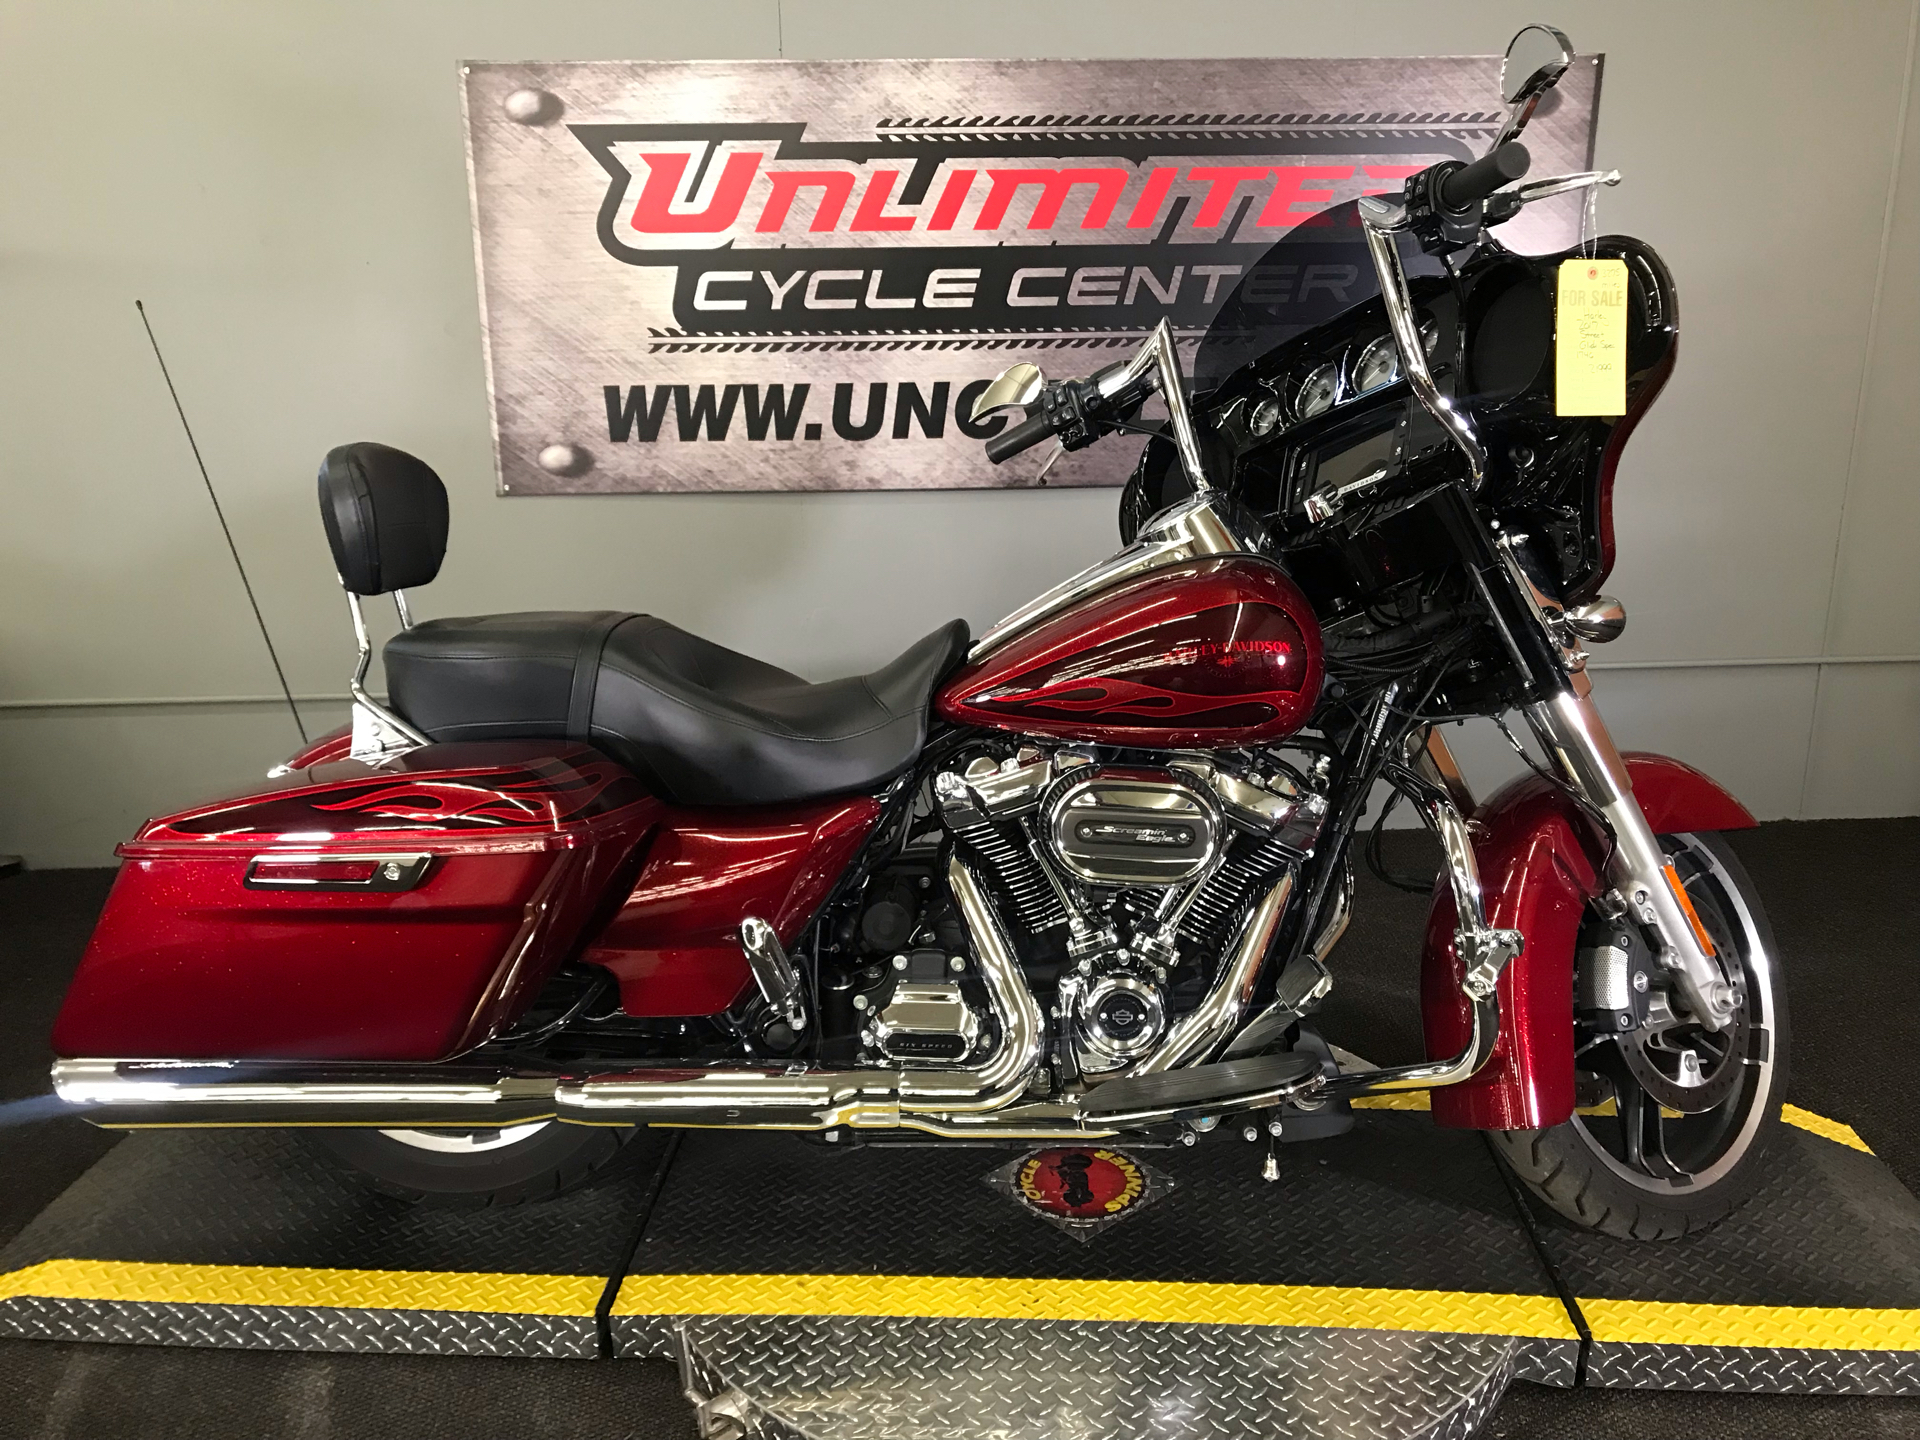 Used 2017 Harley Davidson Street Glide Special Motorcycles In Tyrone Pa 63298 Hard Candy Hot Rod Red Flake